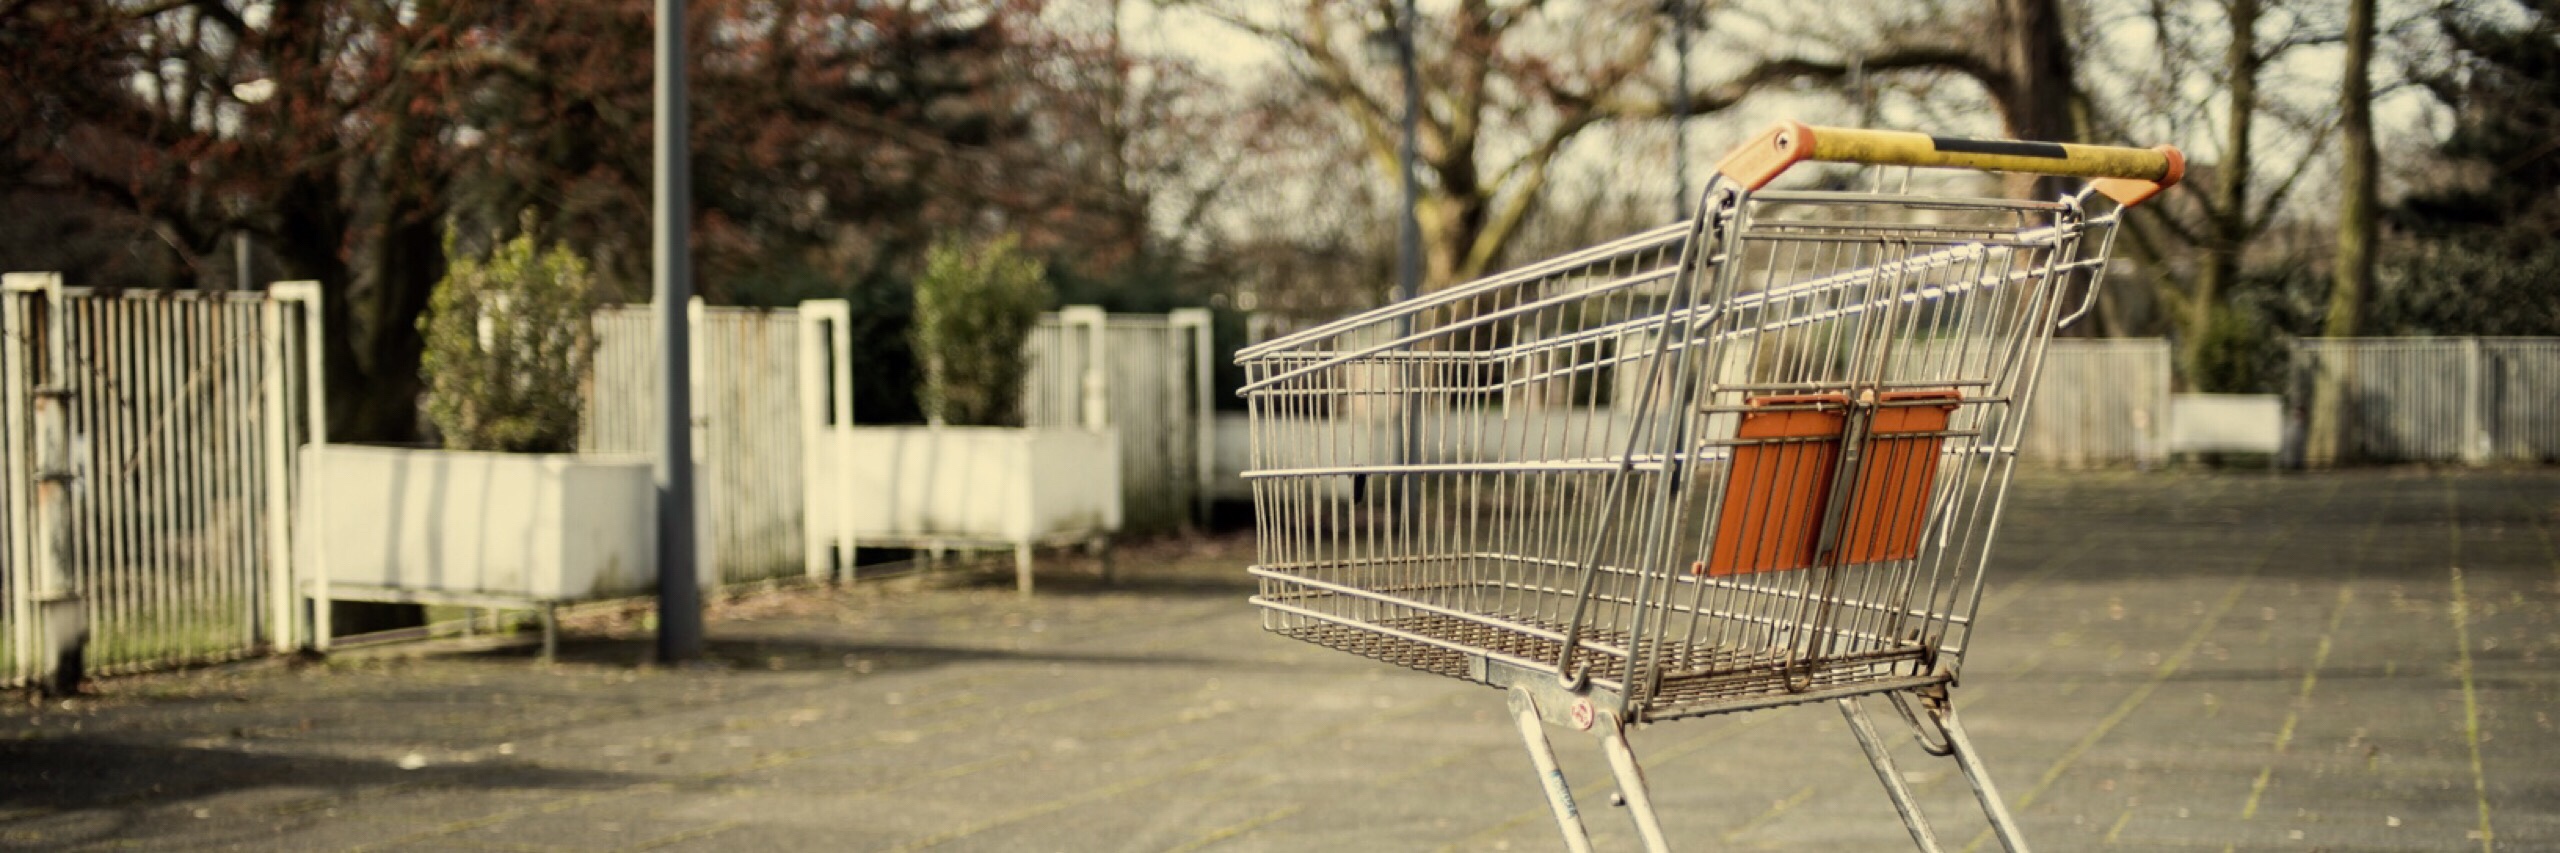 Grocery cart alone